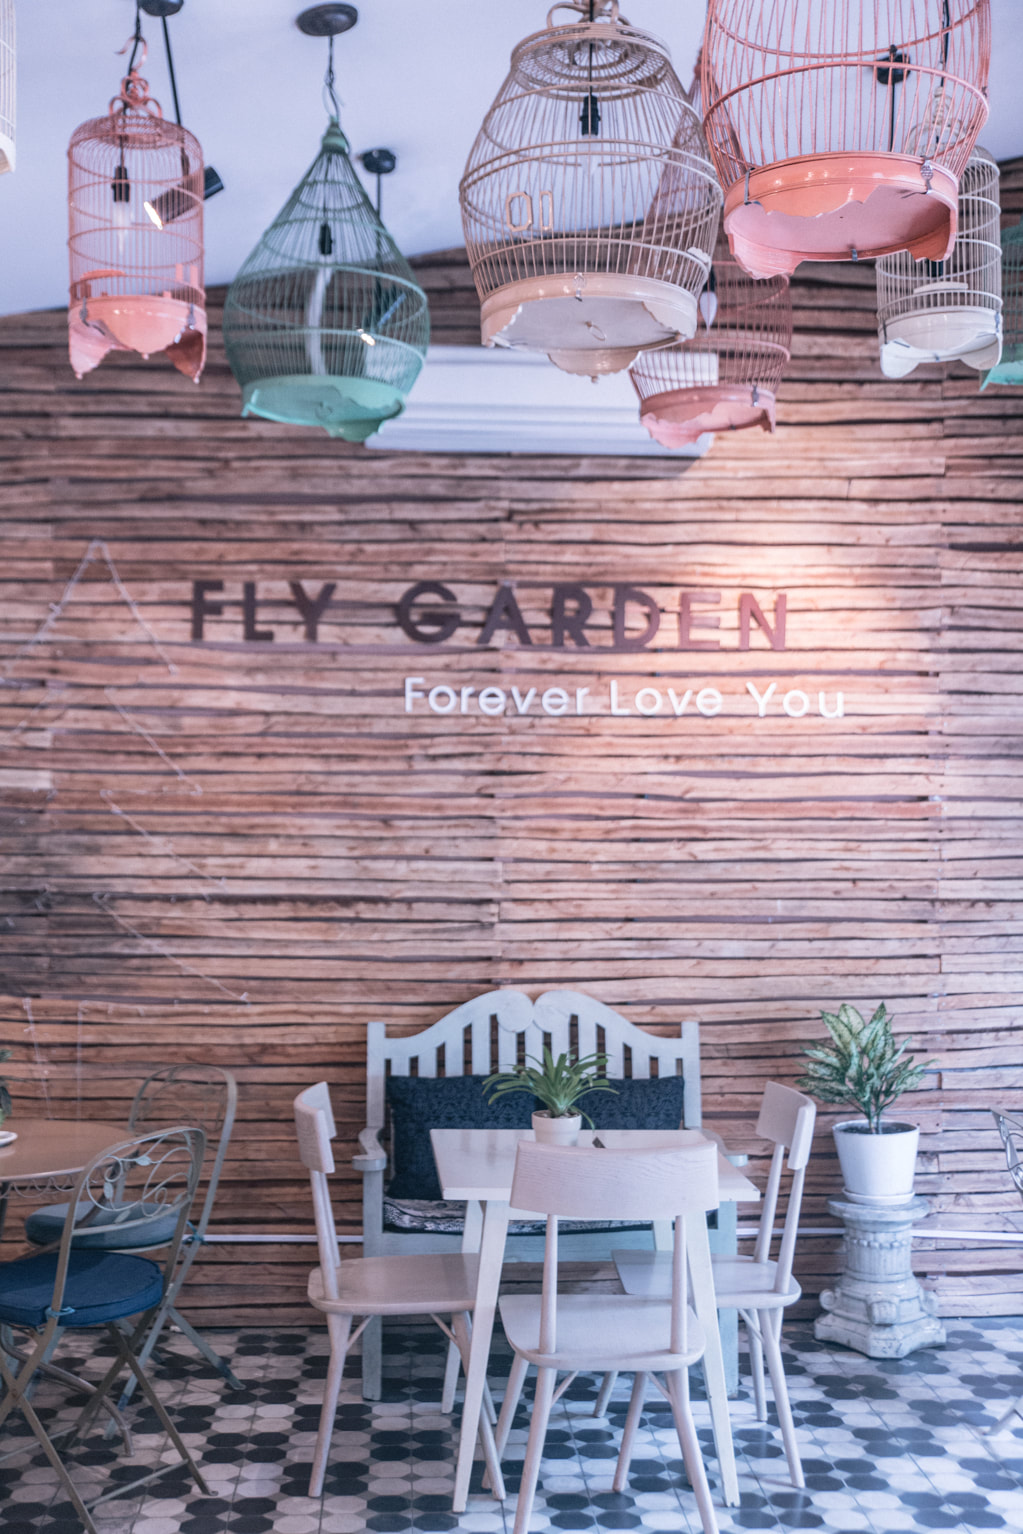 Fly Garden cupcake. Exploring Ho Chi Minh City, Vietnam By The Belle Blog